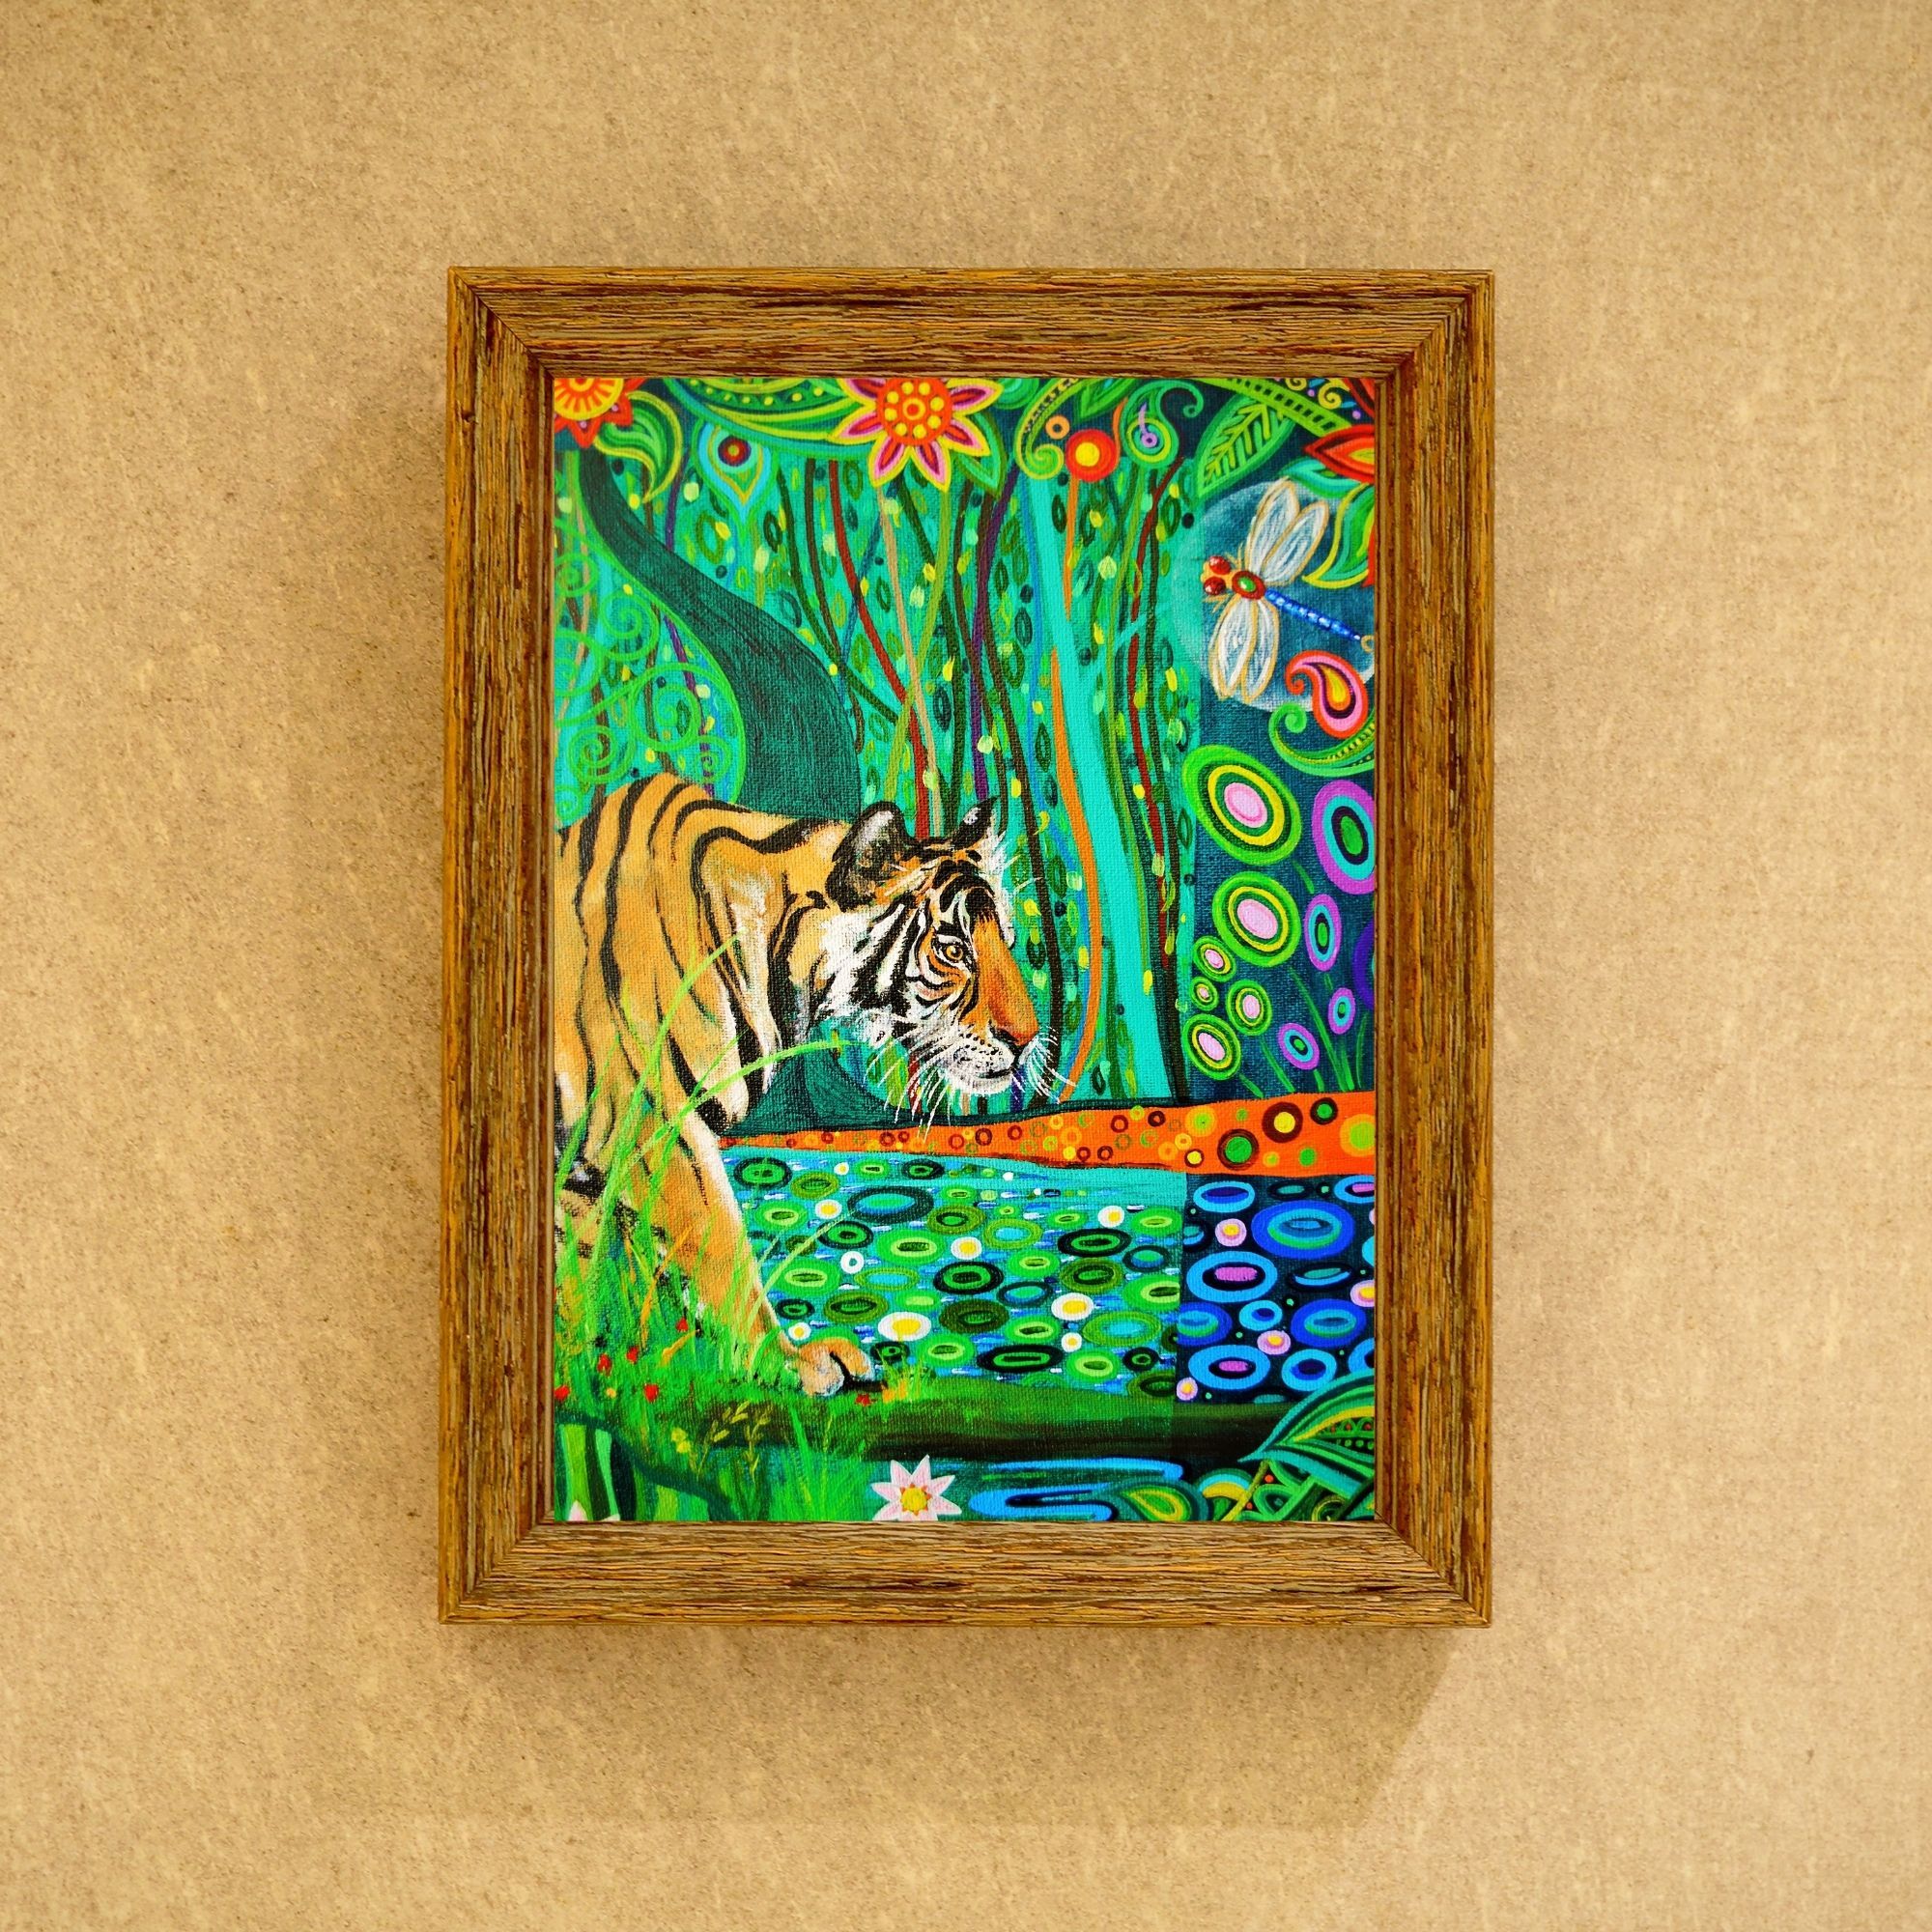 Colourful Tiger art print, downloadable and printable at home, in a portrait wood effect frame (not available to purchase)